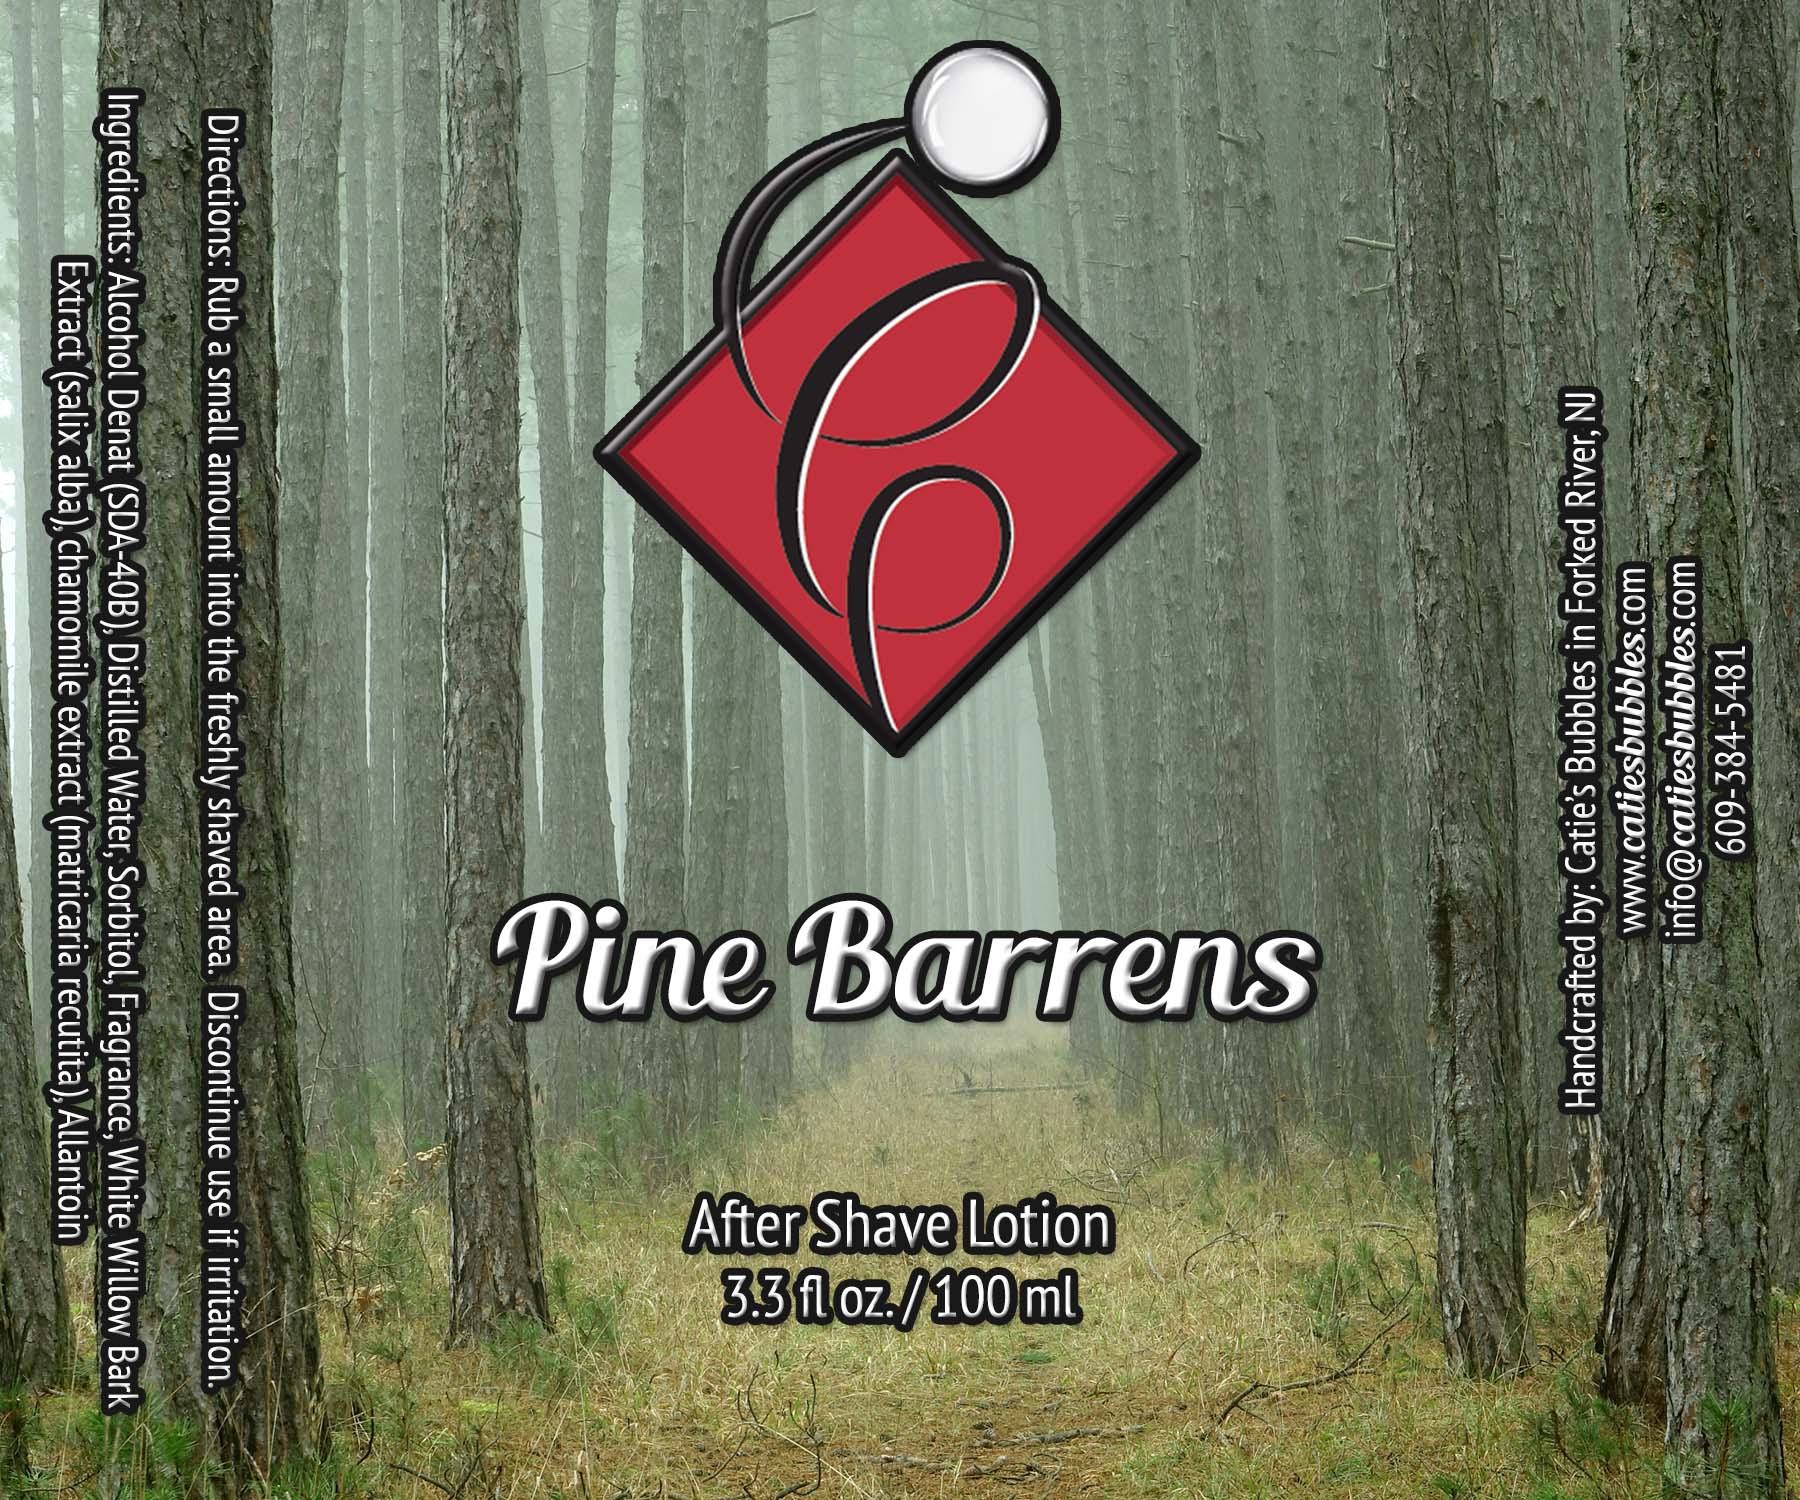 Pine Barrens After Shave Lotion